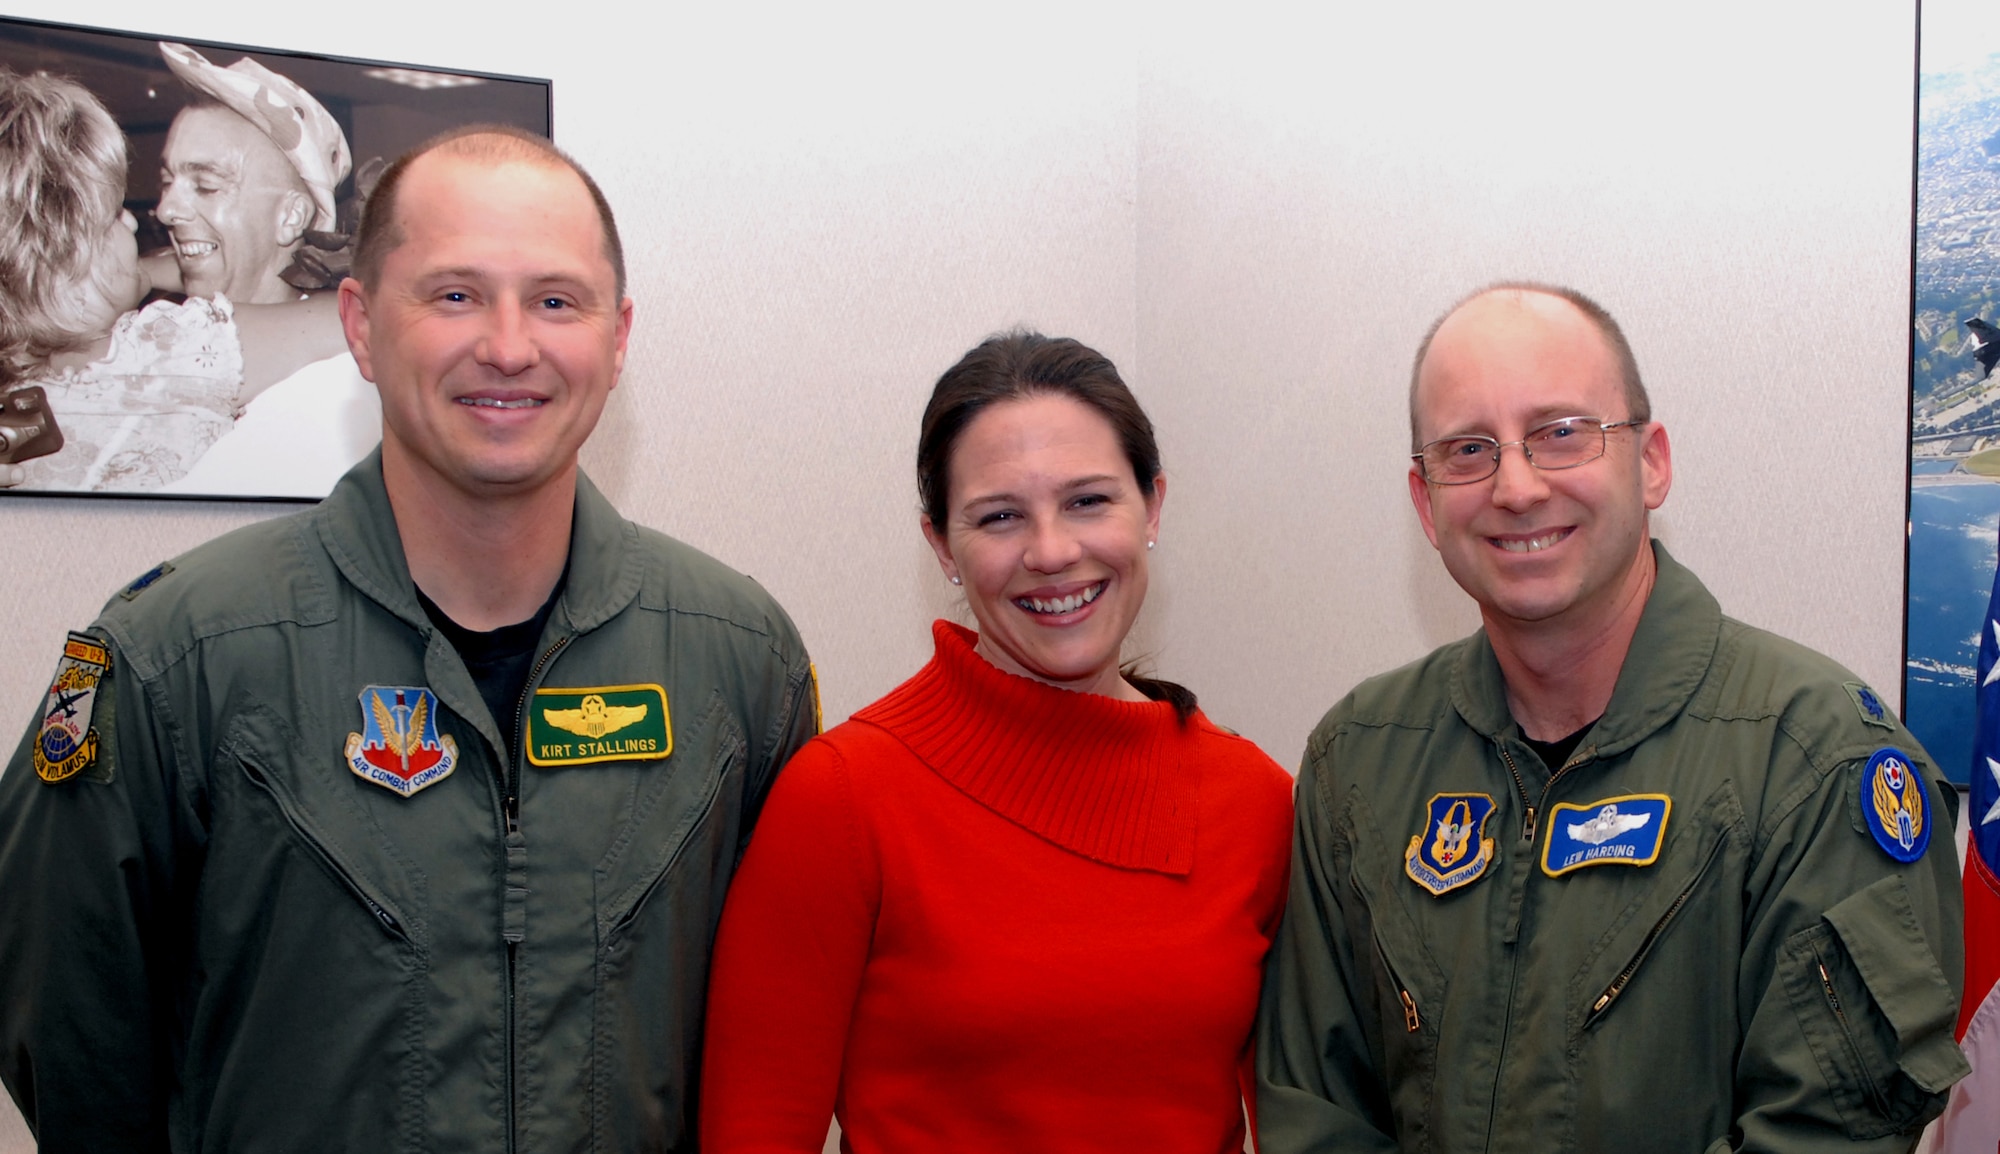 Stephanie Stallings, center, is all smiles after enlisting in the Reserve's 940th Air Refueling Wing, here. She is flanked by left, her husband, Lt. Col. Kirt Stallings, 9th Reconnaissance Wing director of staff, and right, Lt. Col. Lew Harding, 940th ARW chief of safety, who conducted her swearing in ceremony. (U.S. Air Force photo/SMSgt. Ellen L. Hatfield)